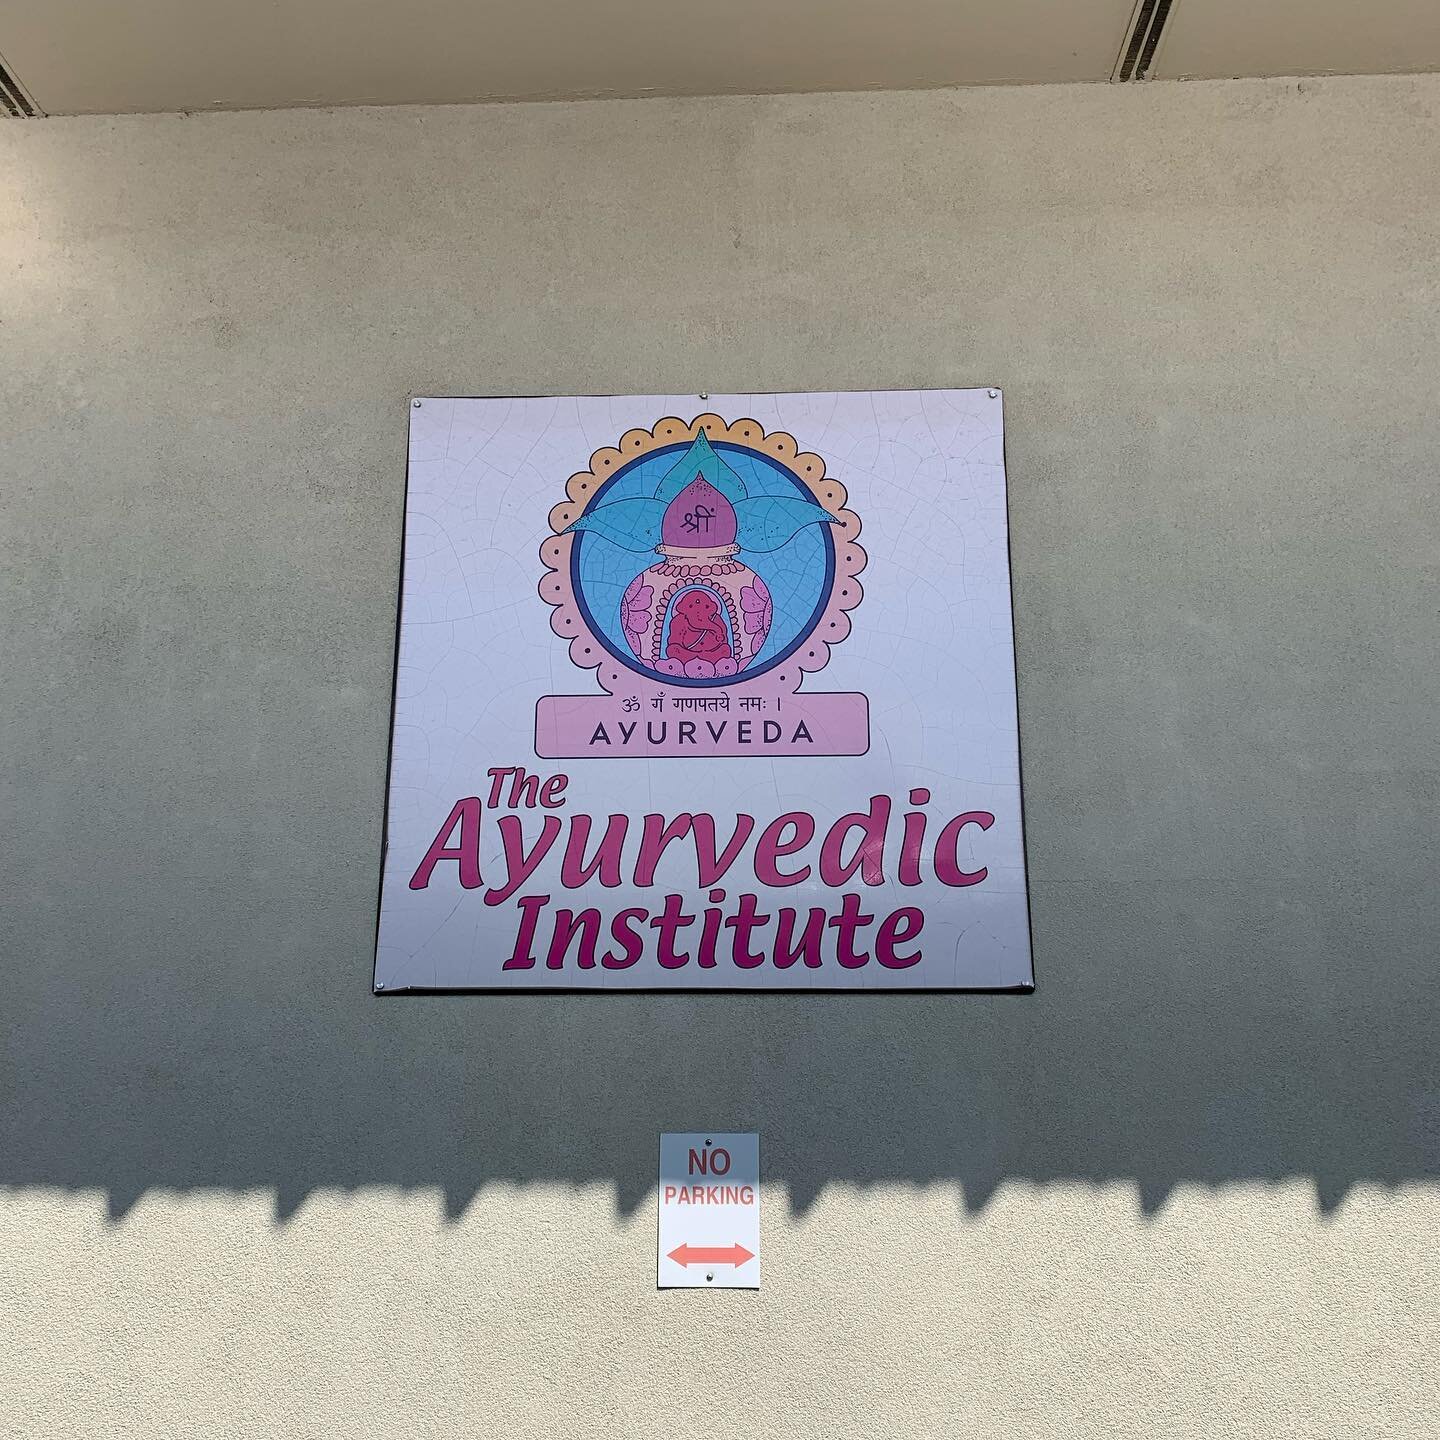 Dr. Vasant Lad&rsquo;s Ayurvedic Institute🧘🏼&zwj;♀️New Journey, New knowledge, New Science 🌟 Intensive Ayurvedic study for the next ten months! Join one of my classes as I learn to weave the Ayurvedic wisdom into the asana sequence 🙏🏼🙏🏼🙏🏼❤️❤